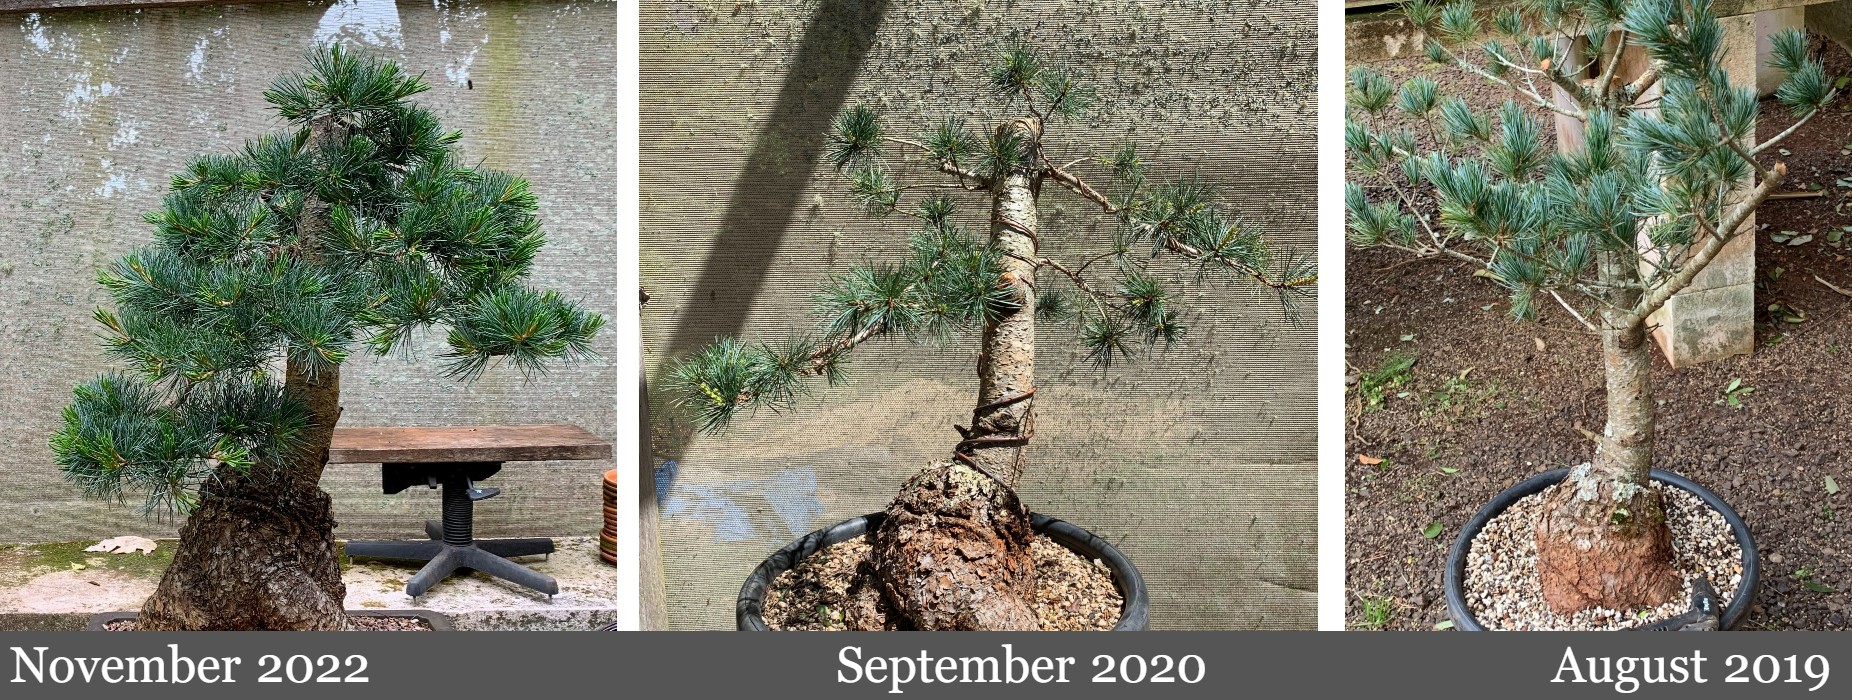 japanese white pine from august 2019 to november 2022 02